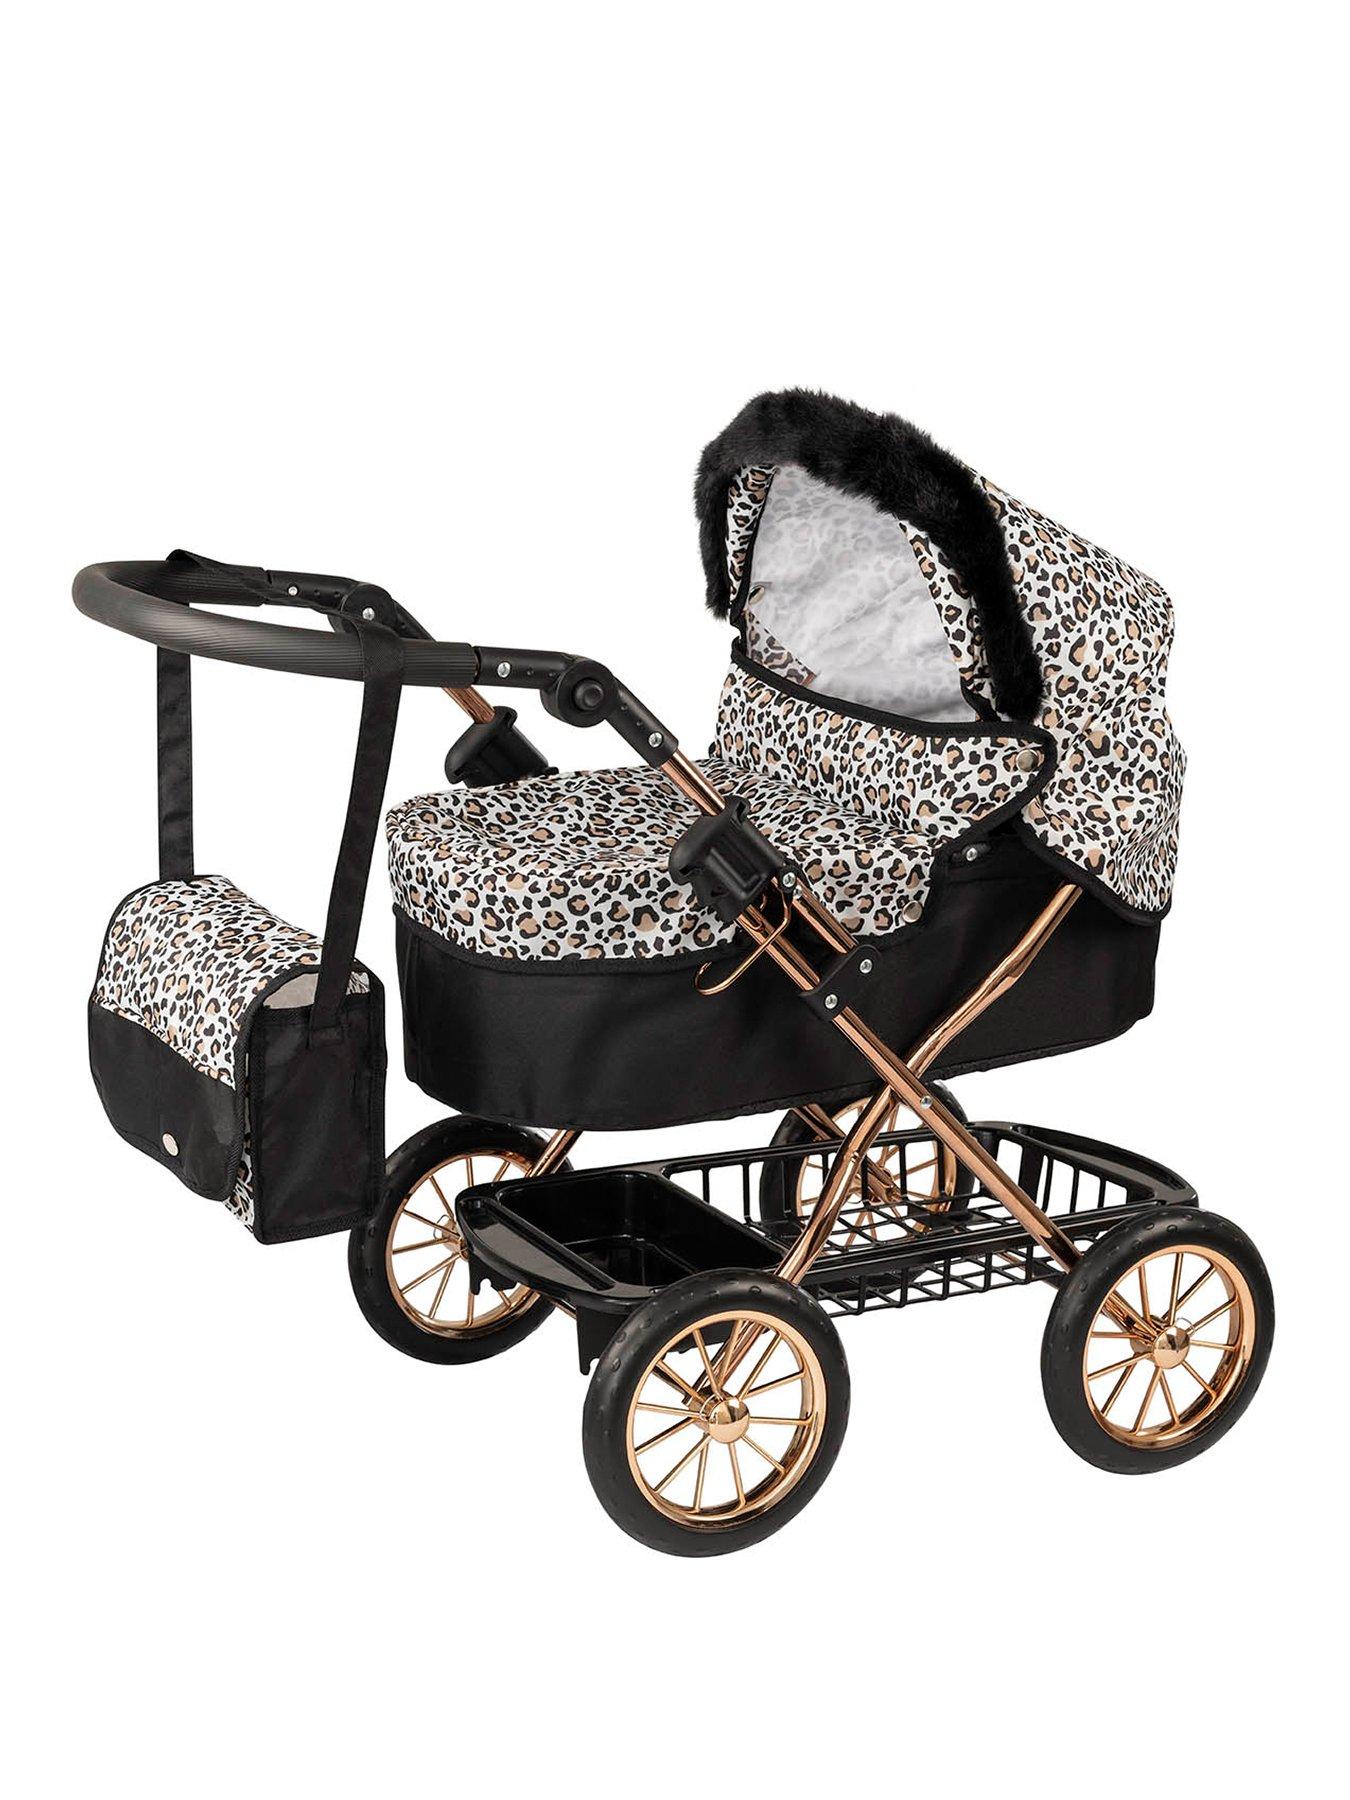 dolls pram suitable for 10 year old